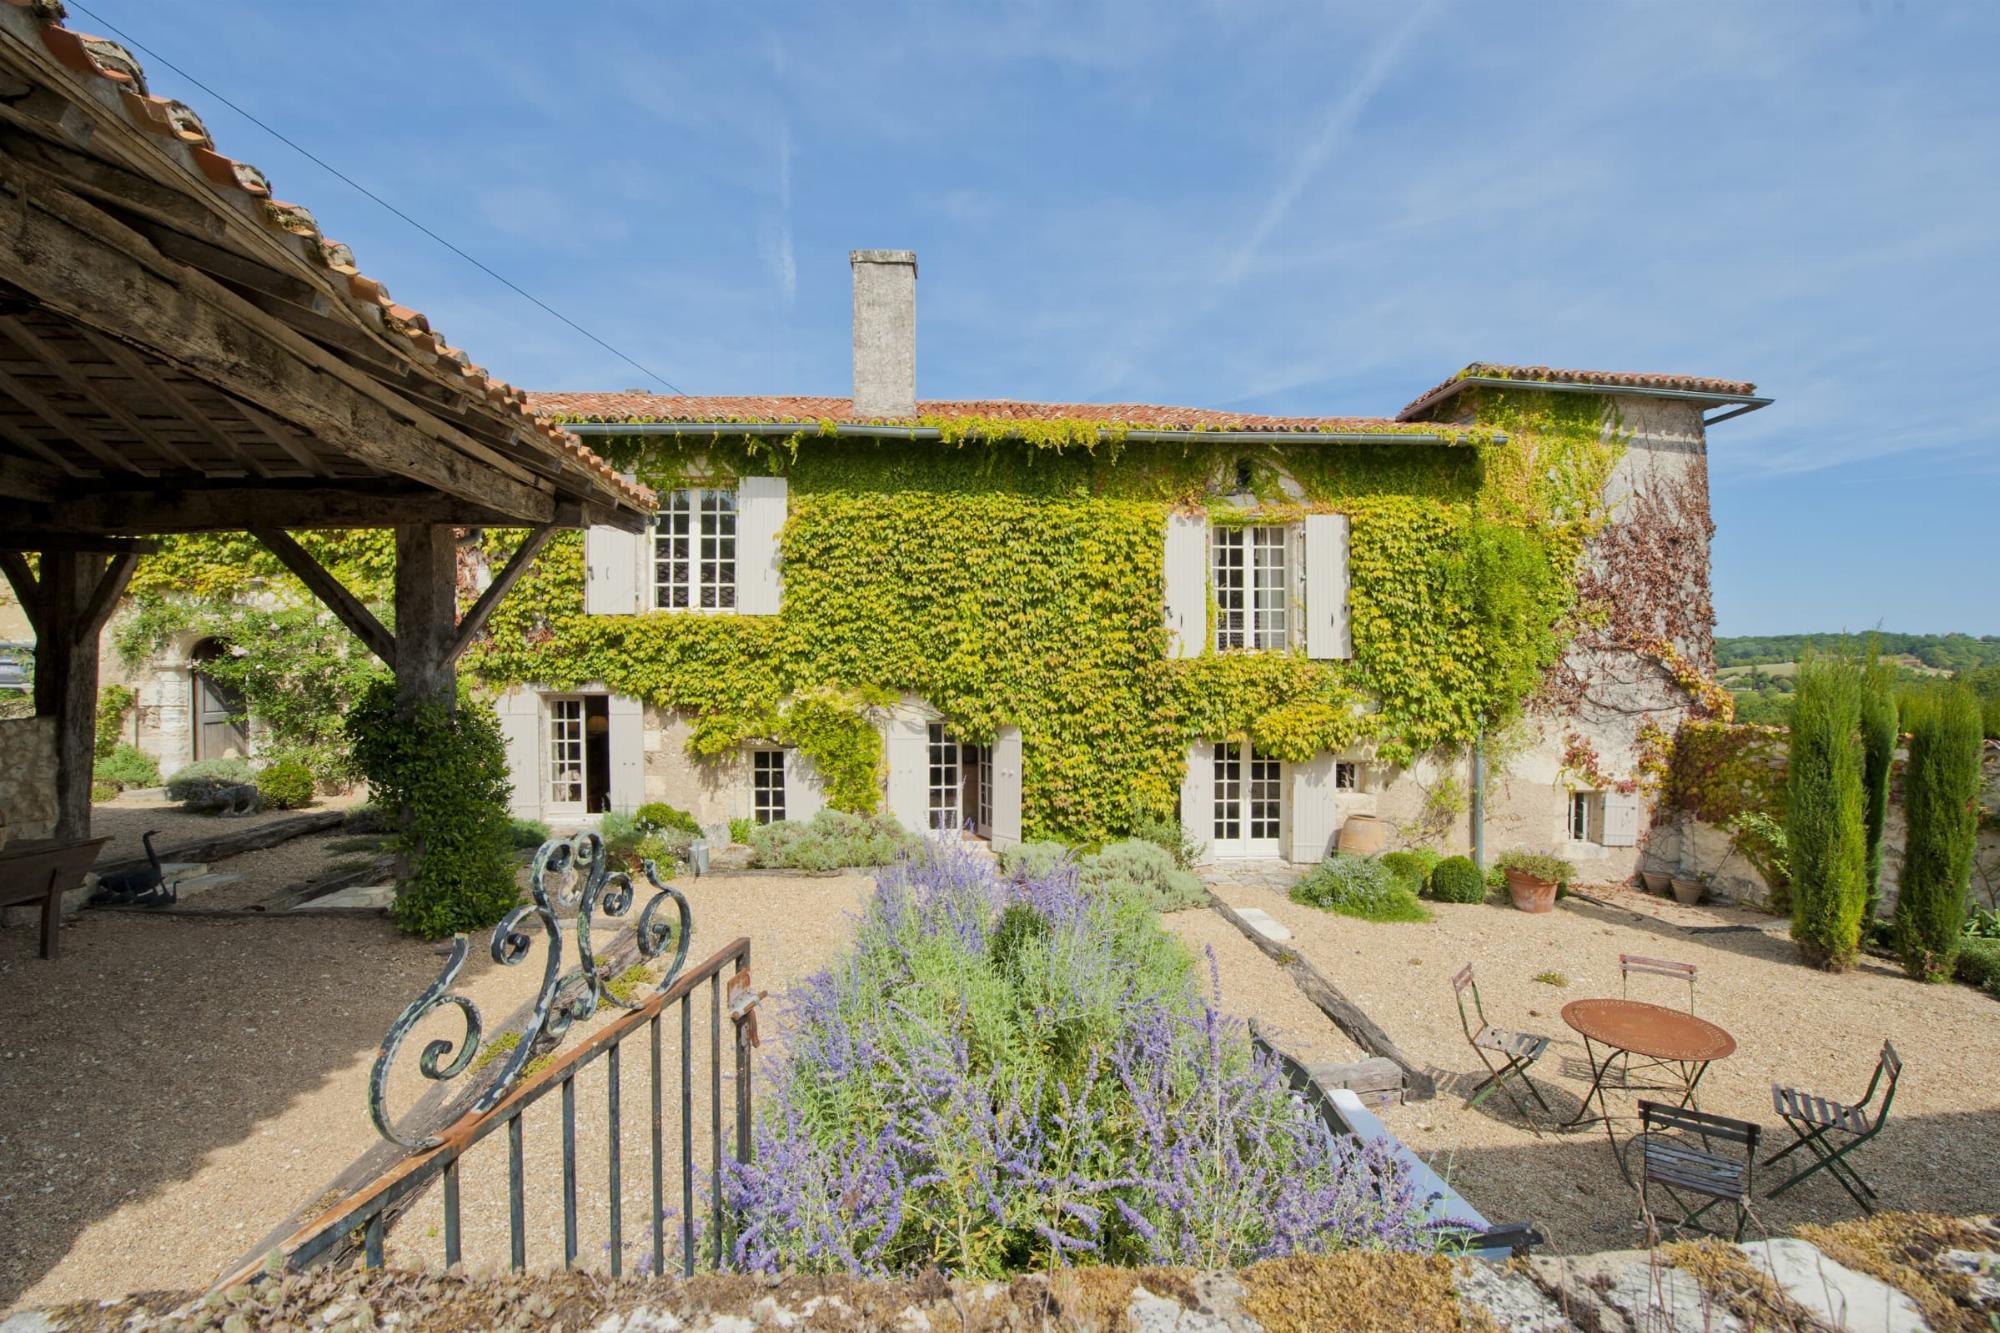 Rental　pool　Le　heated　France　home　in　private　with　Malardier